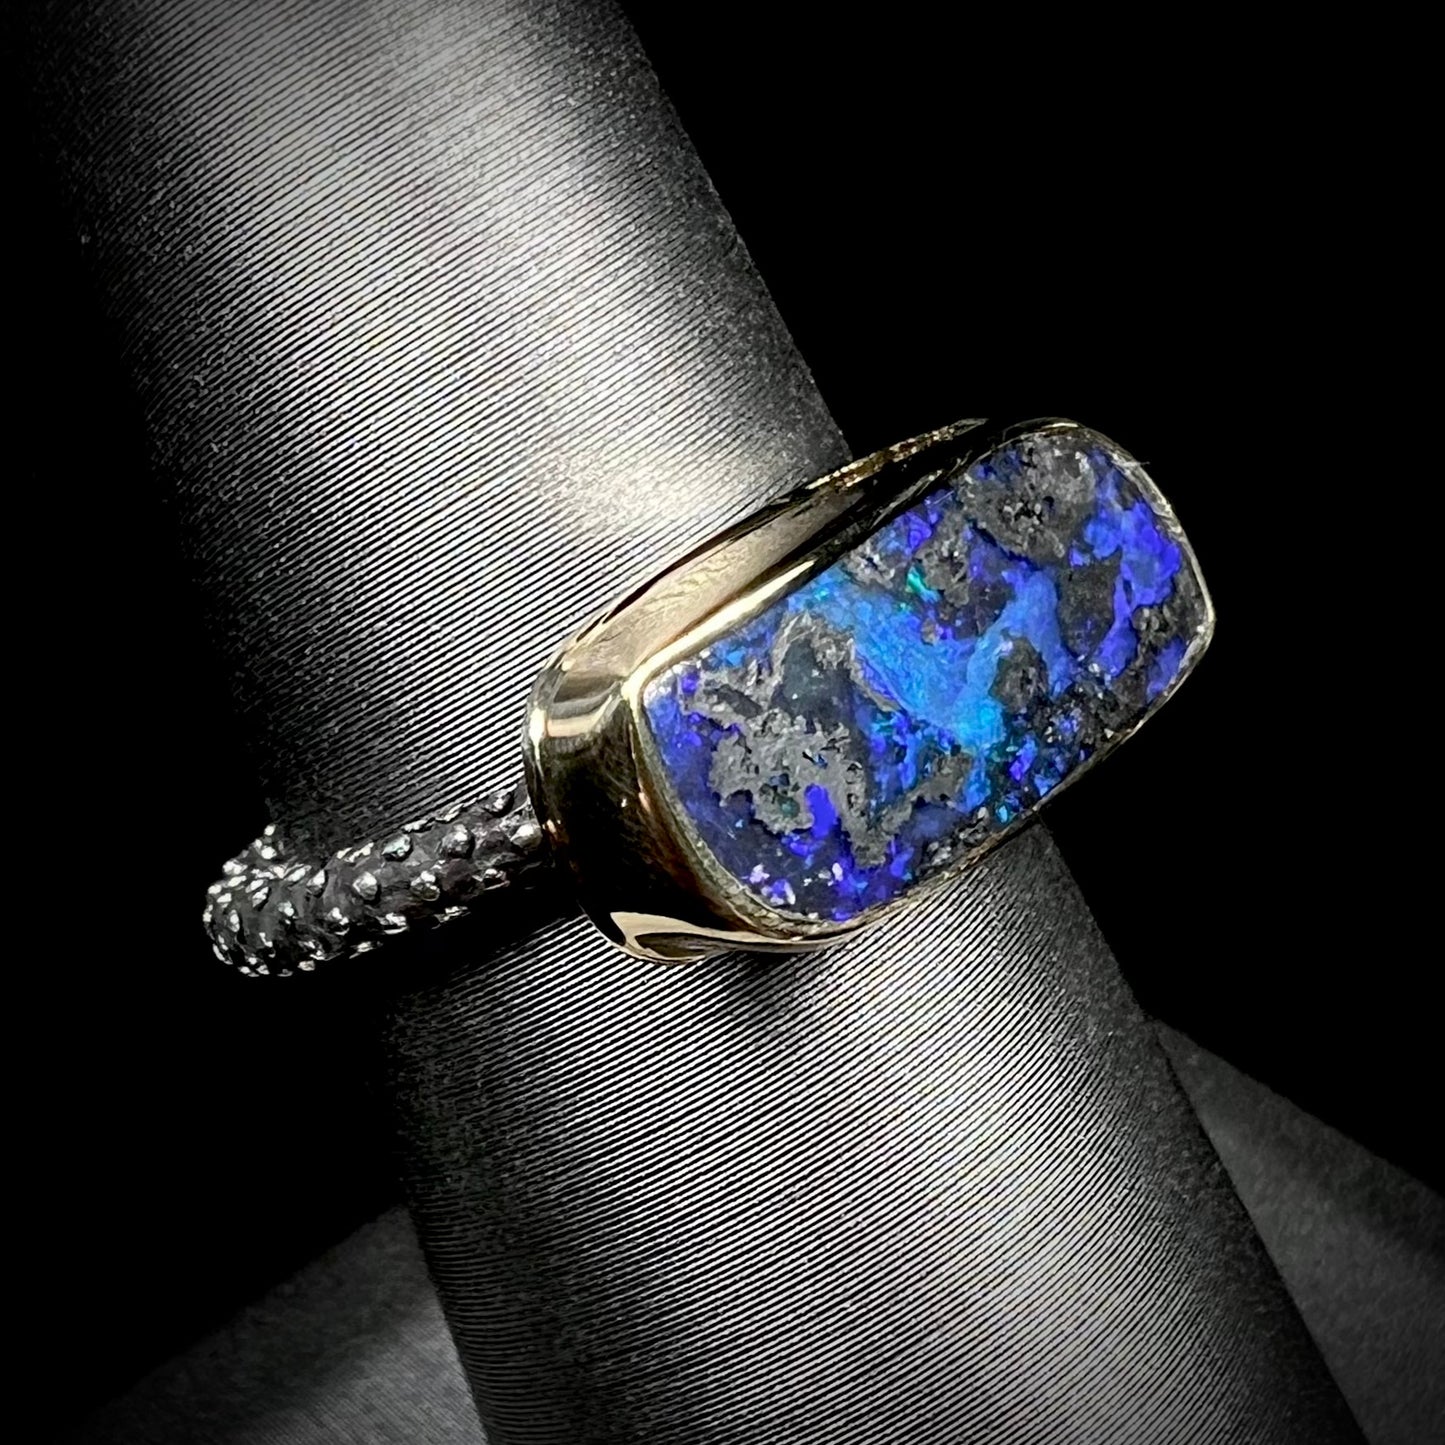 A two-tone sterling silver and 18k gold ring set with a blue boulder opal stone.  The shank is textured.